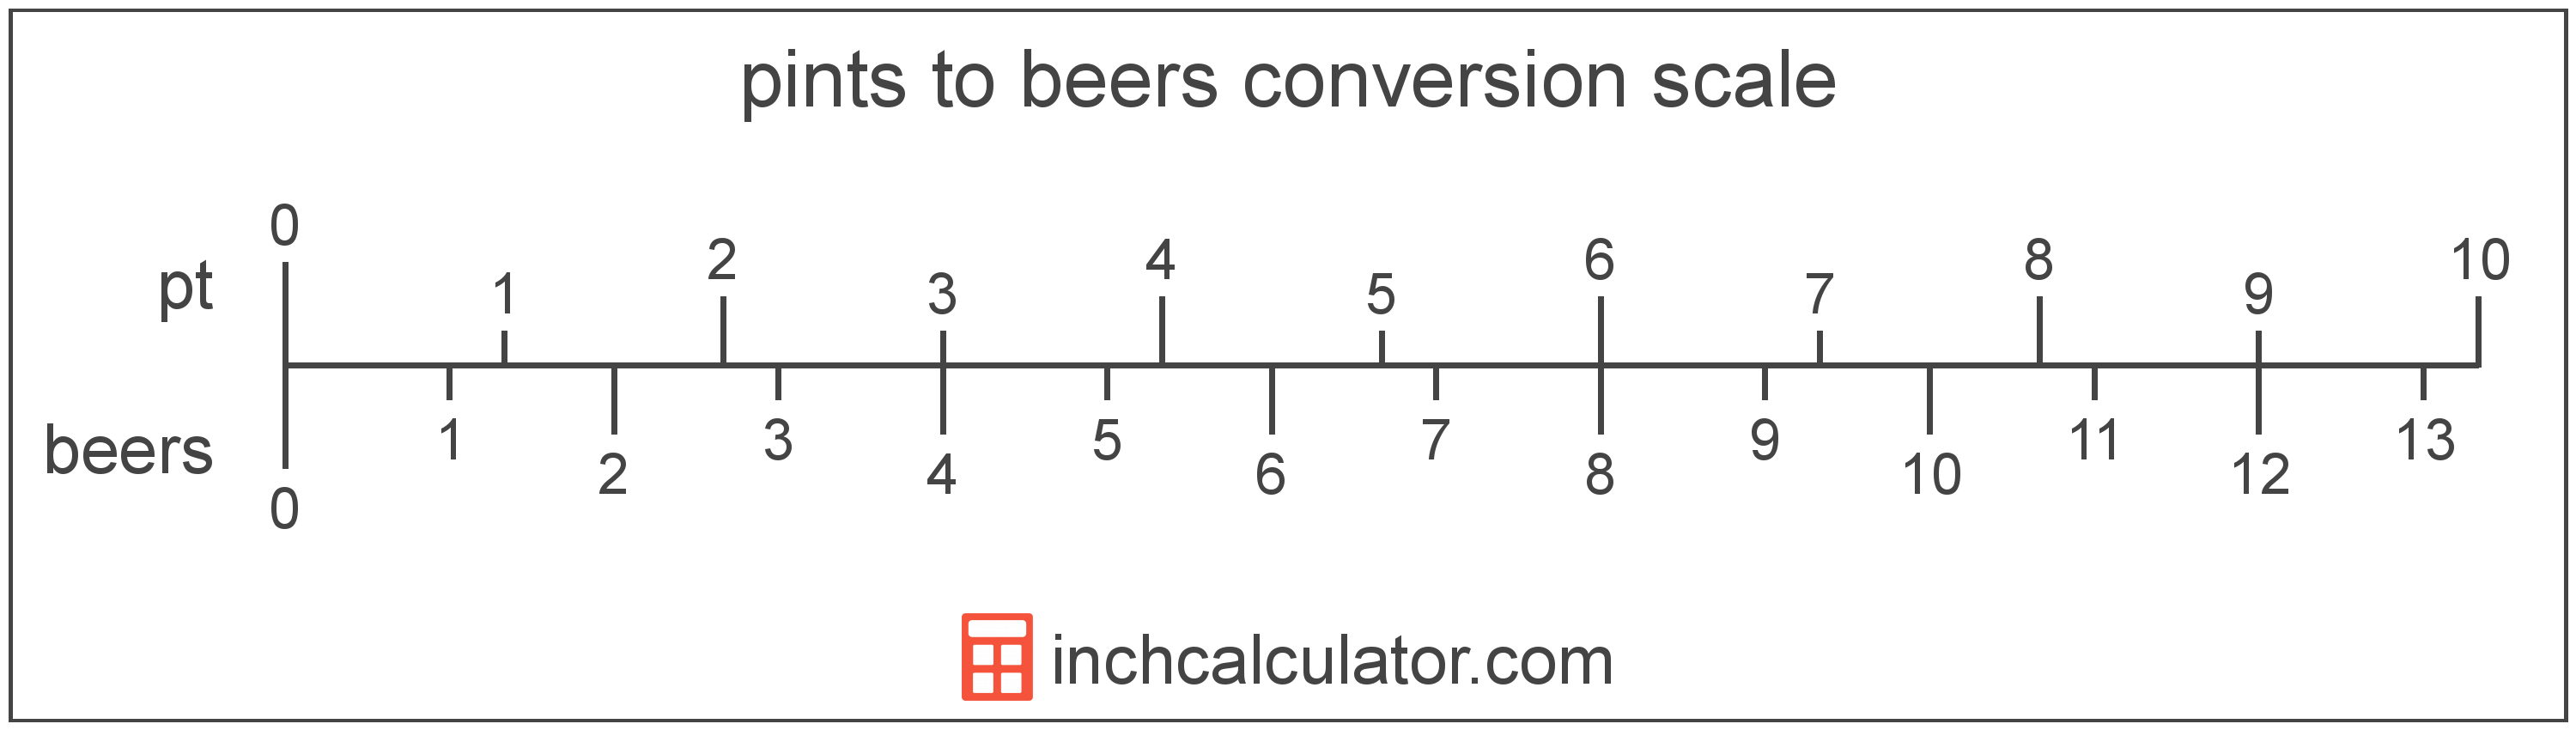 conversion scale showing pints and equivalent beers beer volume values